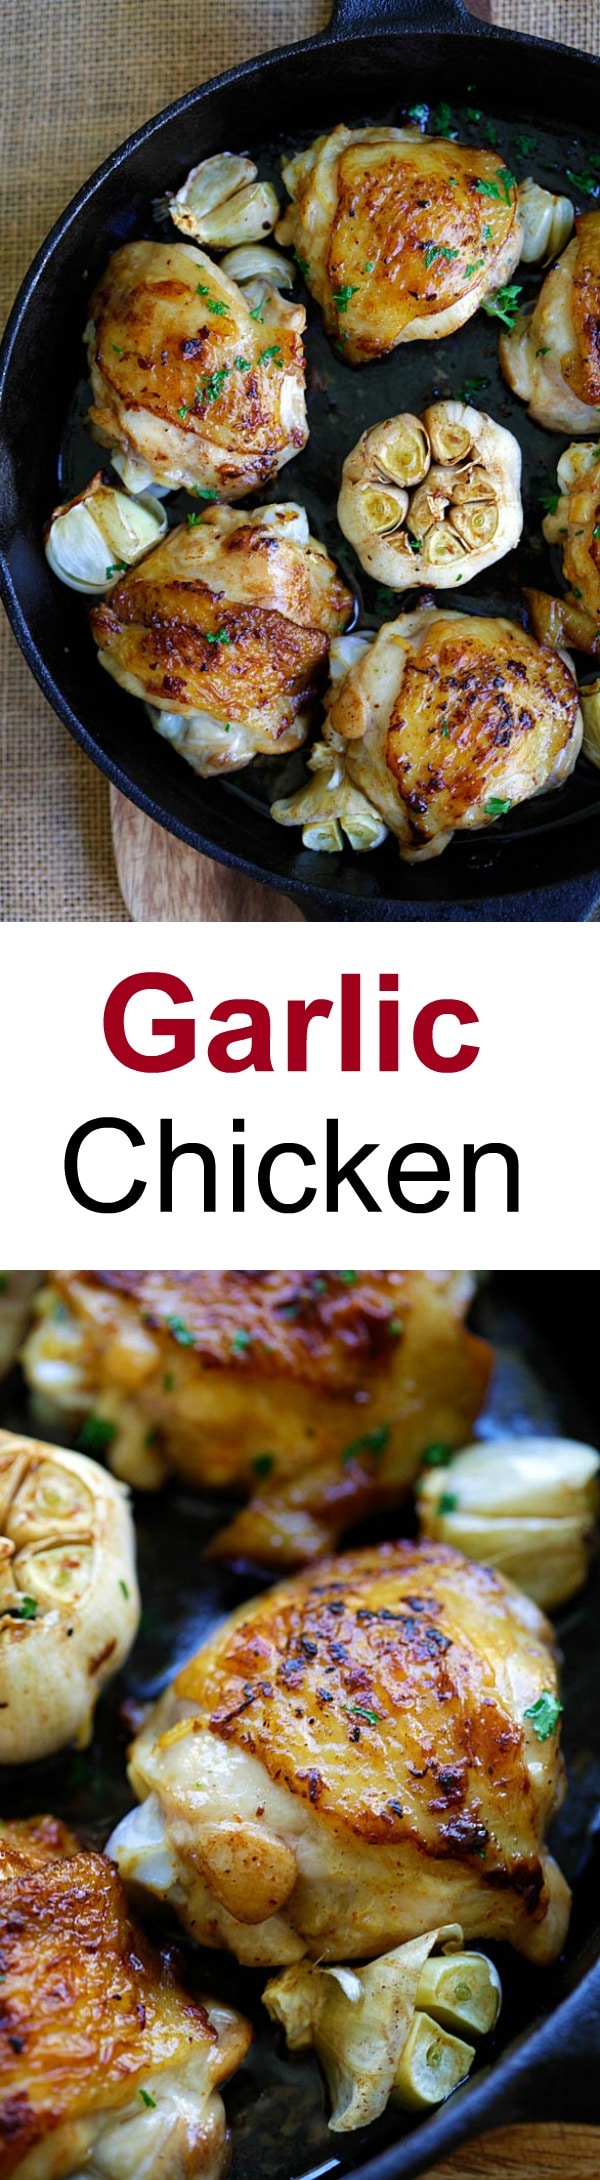 Garlic Chicken – crazy delicious chicken roasted with garlic. Juicy, moist, flavorful skillet chicken with simple ingredients. Dinner is done in 20 mins | rasamalaysia.com